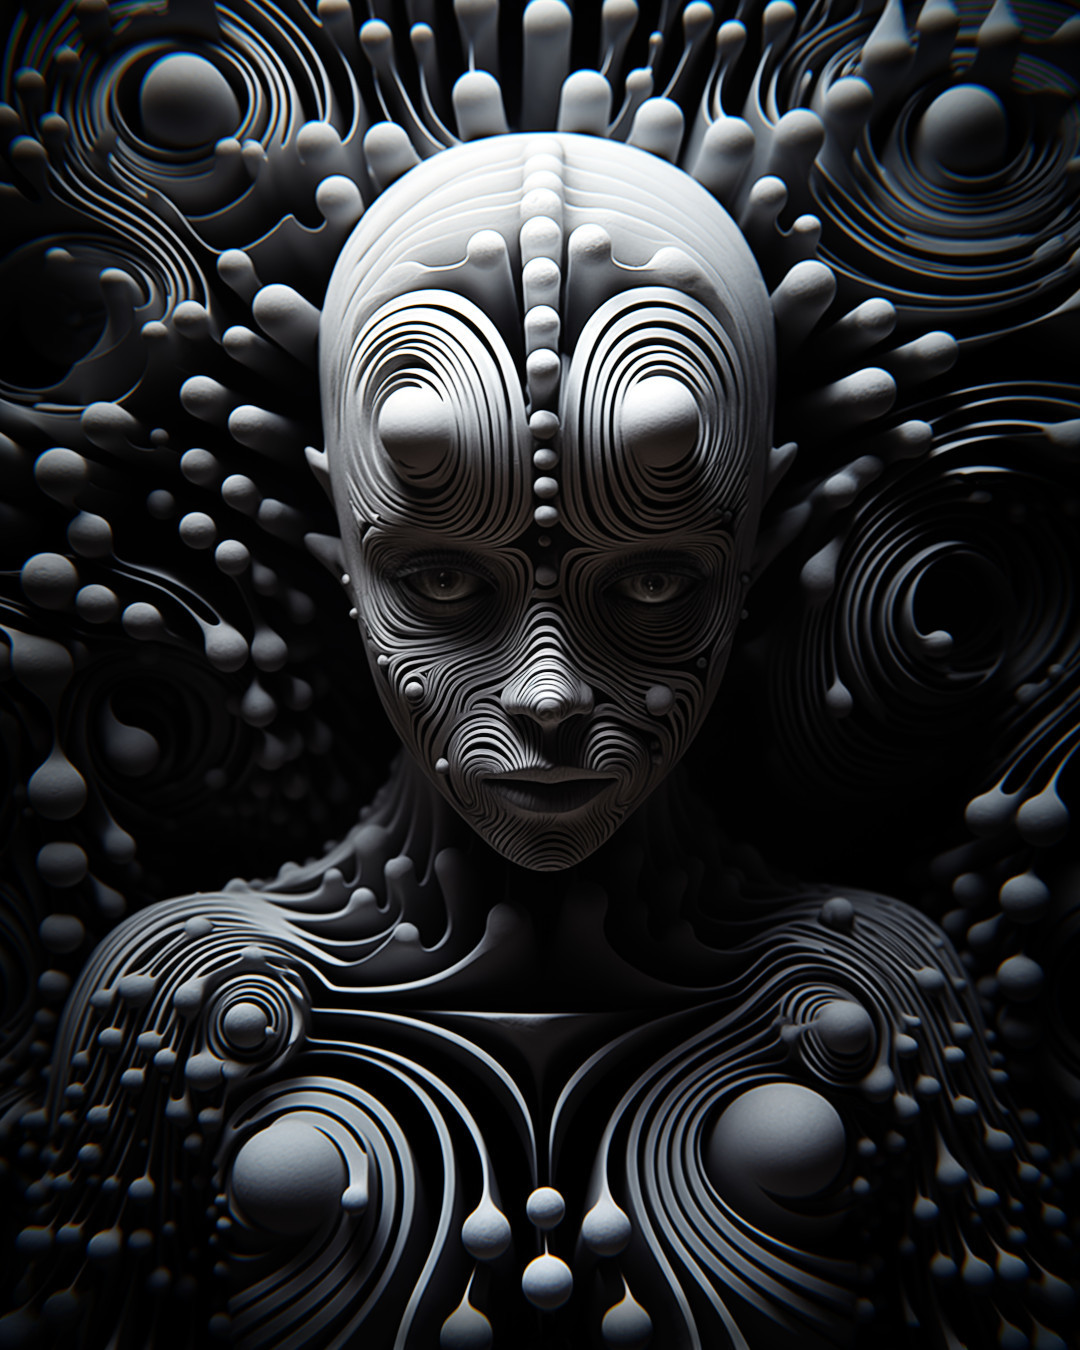 Otherworldly female with swirls and spheres, symmetrical, dark and intricate